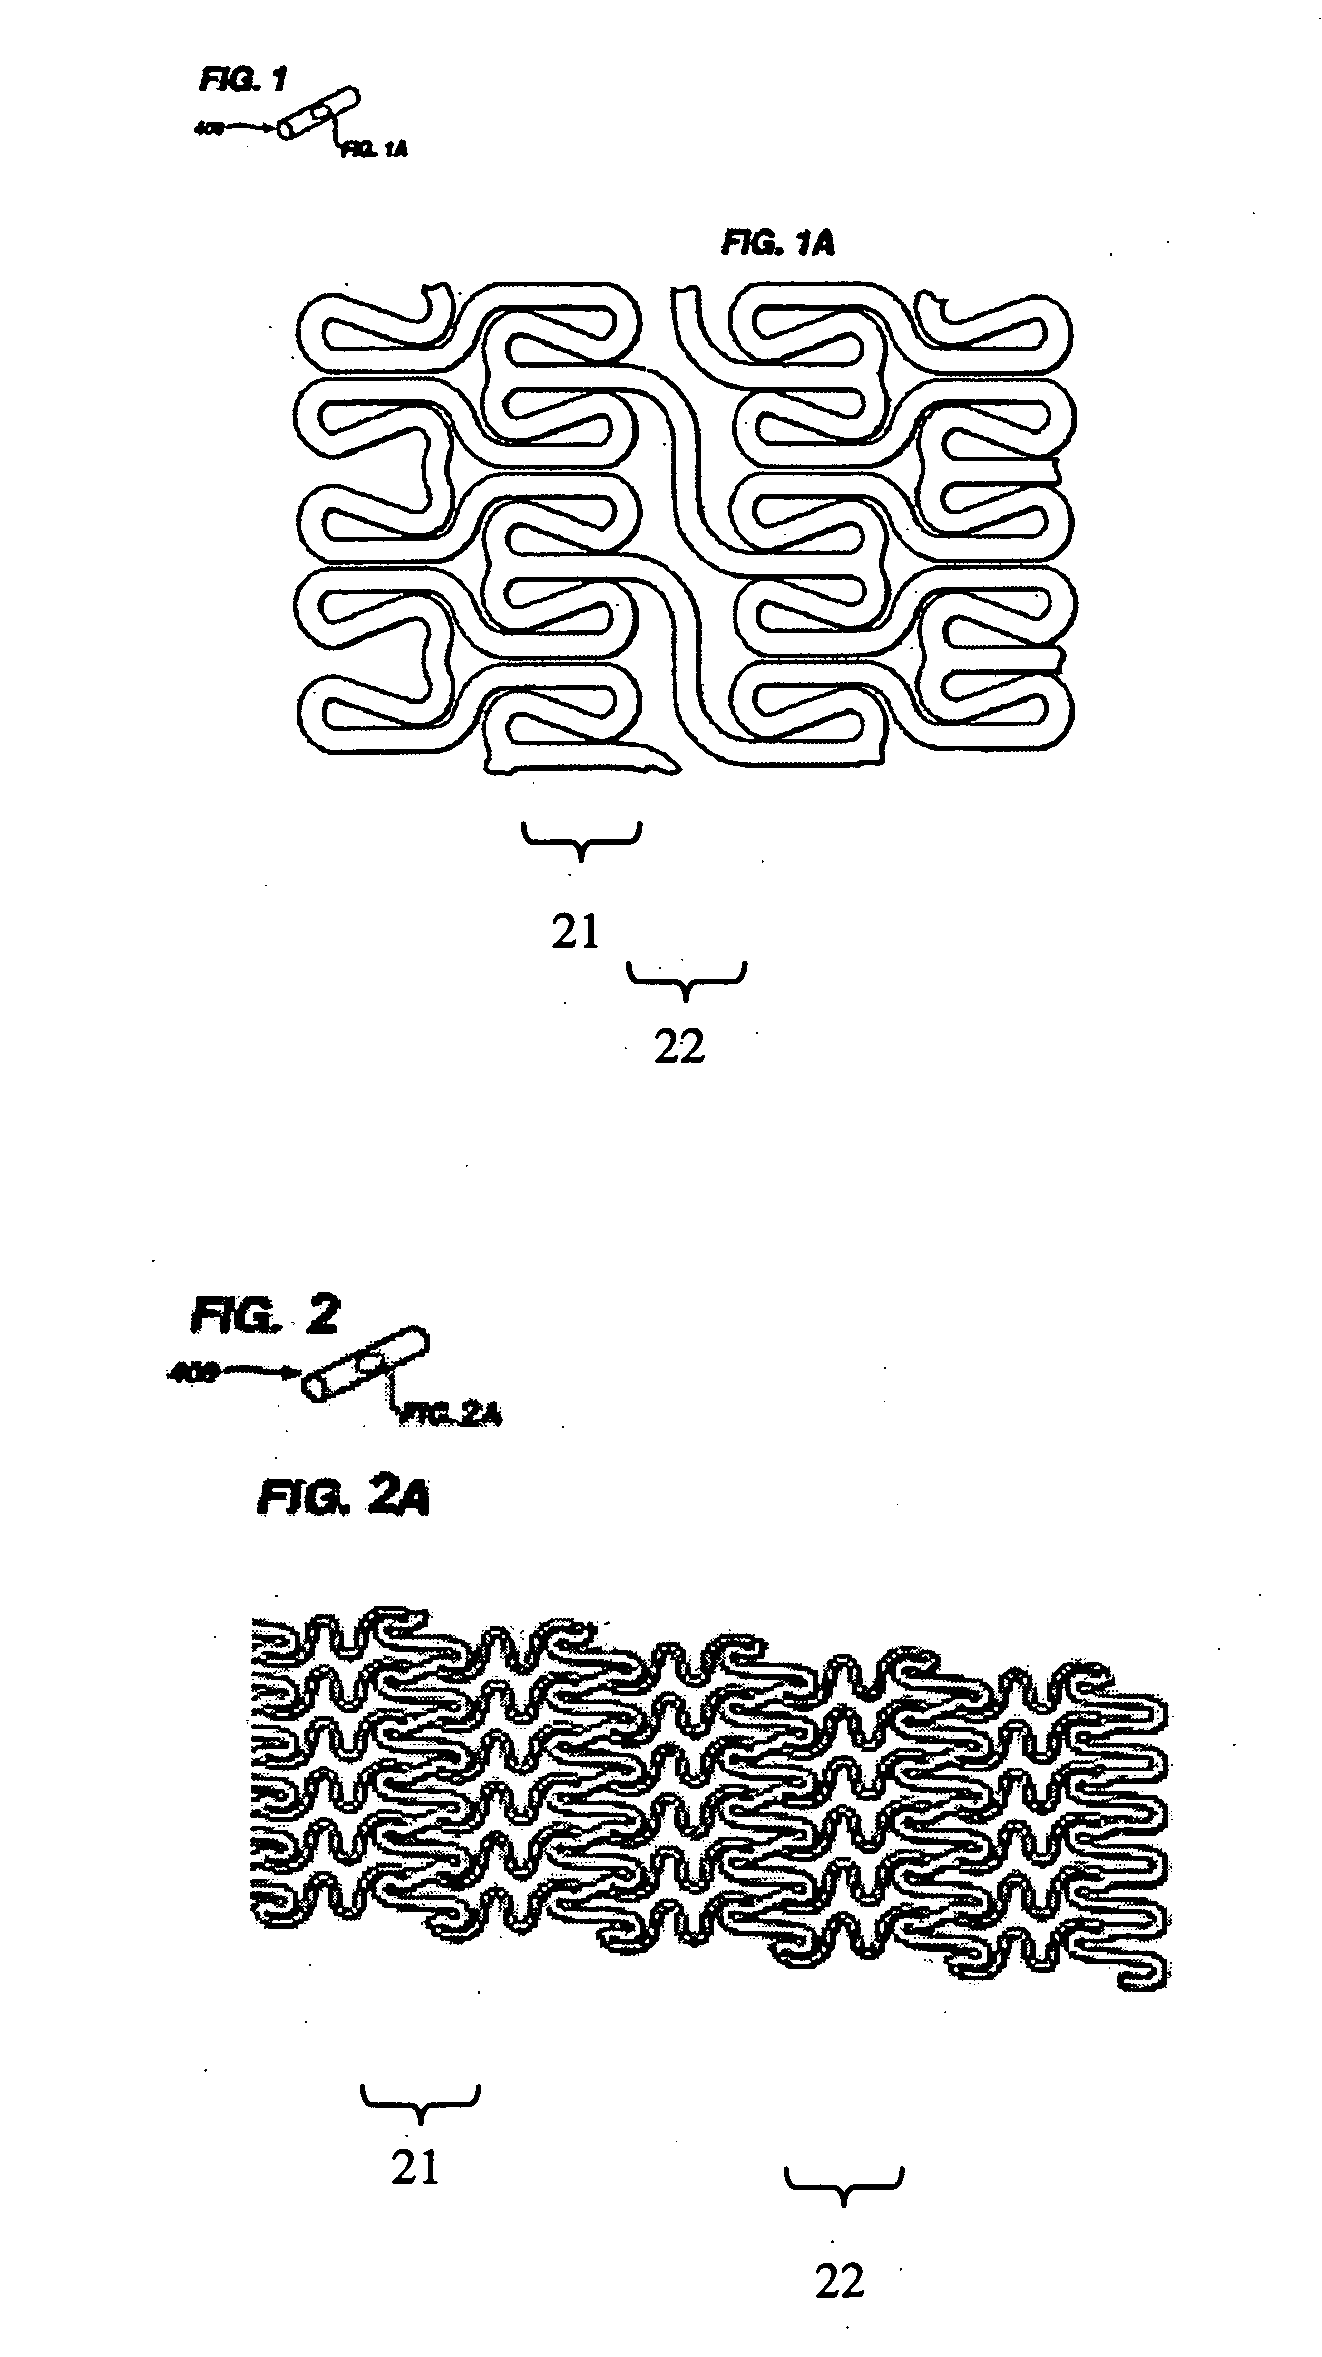 Biodegradable medical devices with enhanced mechanical strength and pharmacological functions